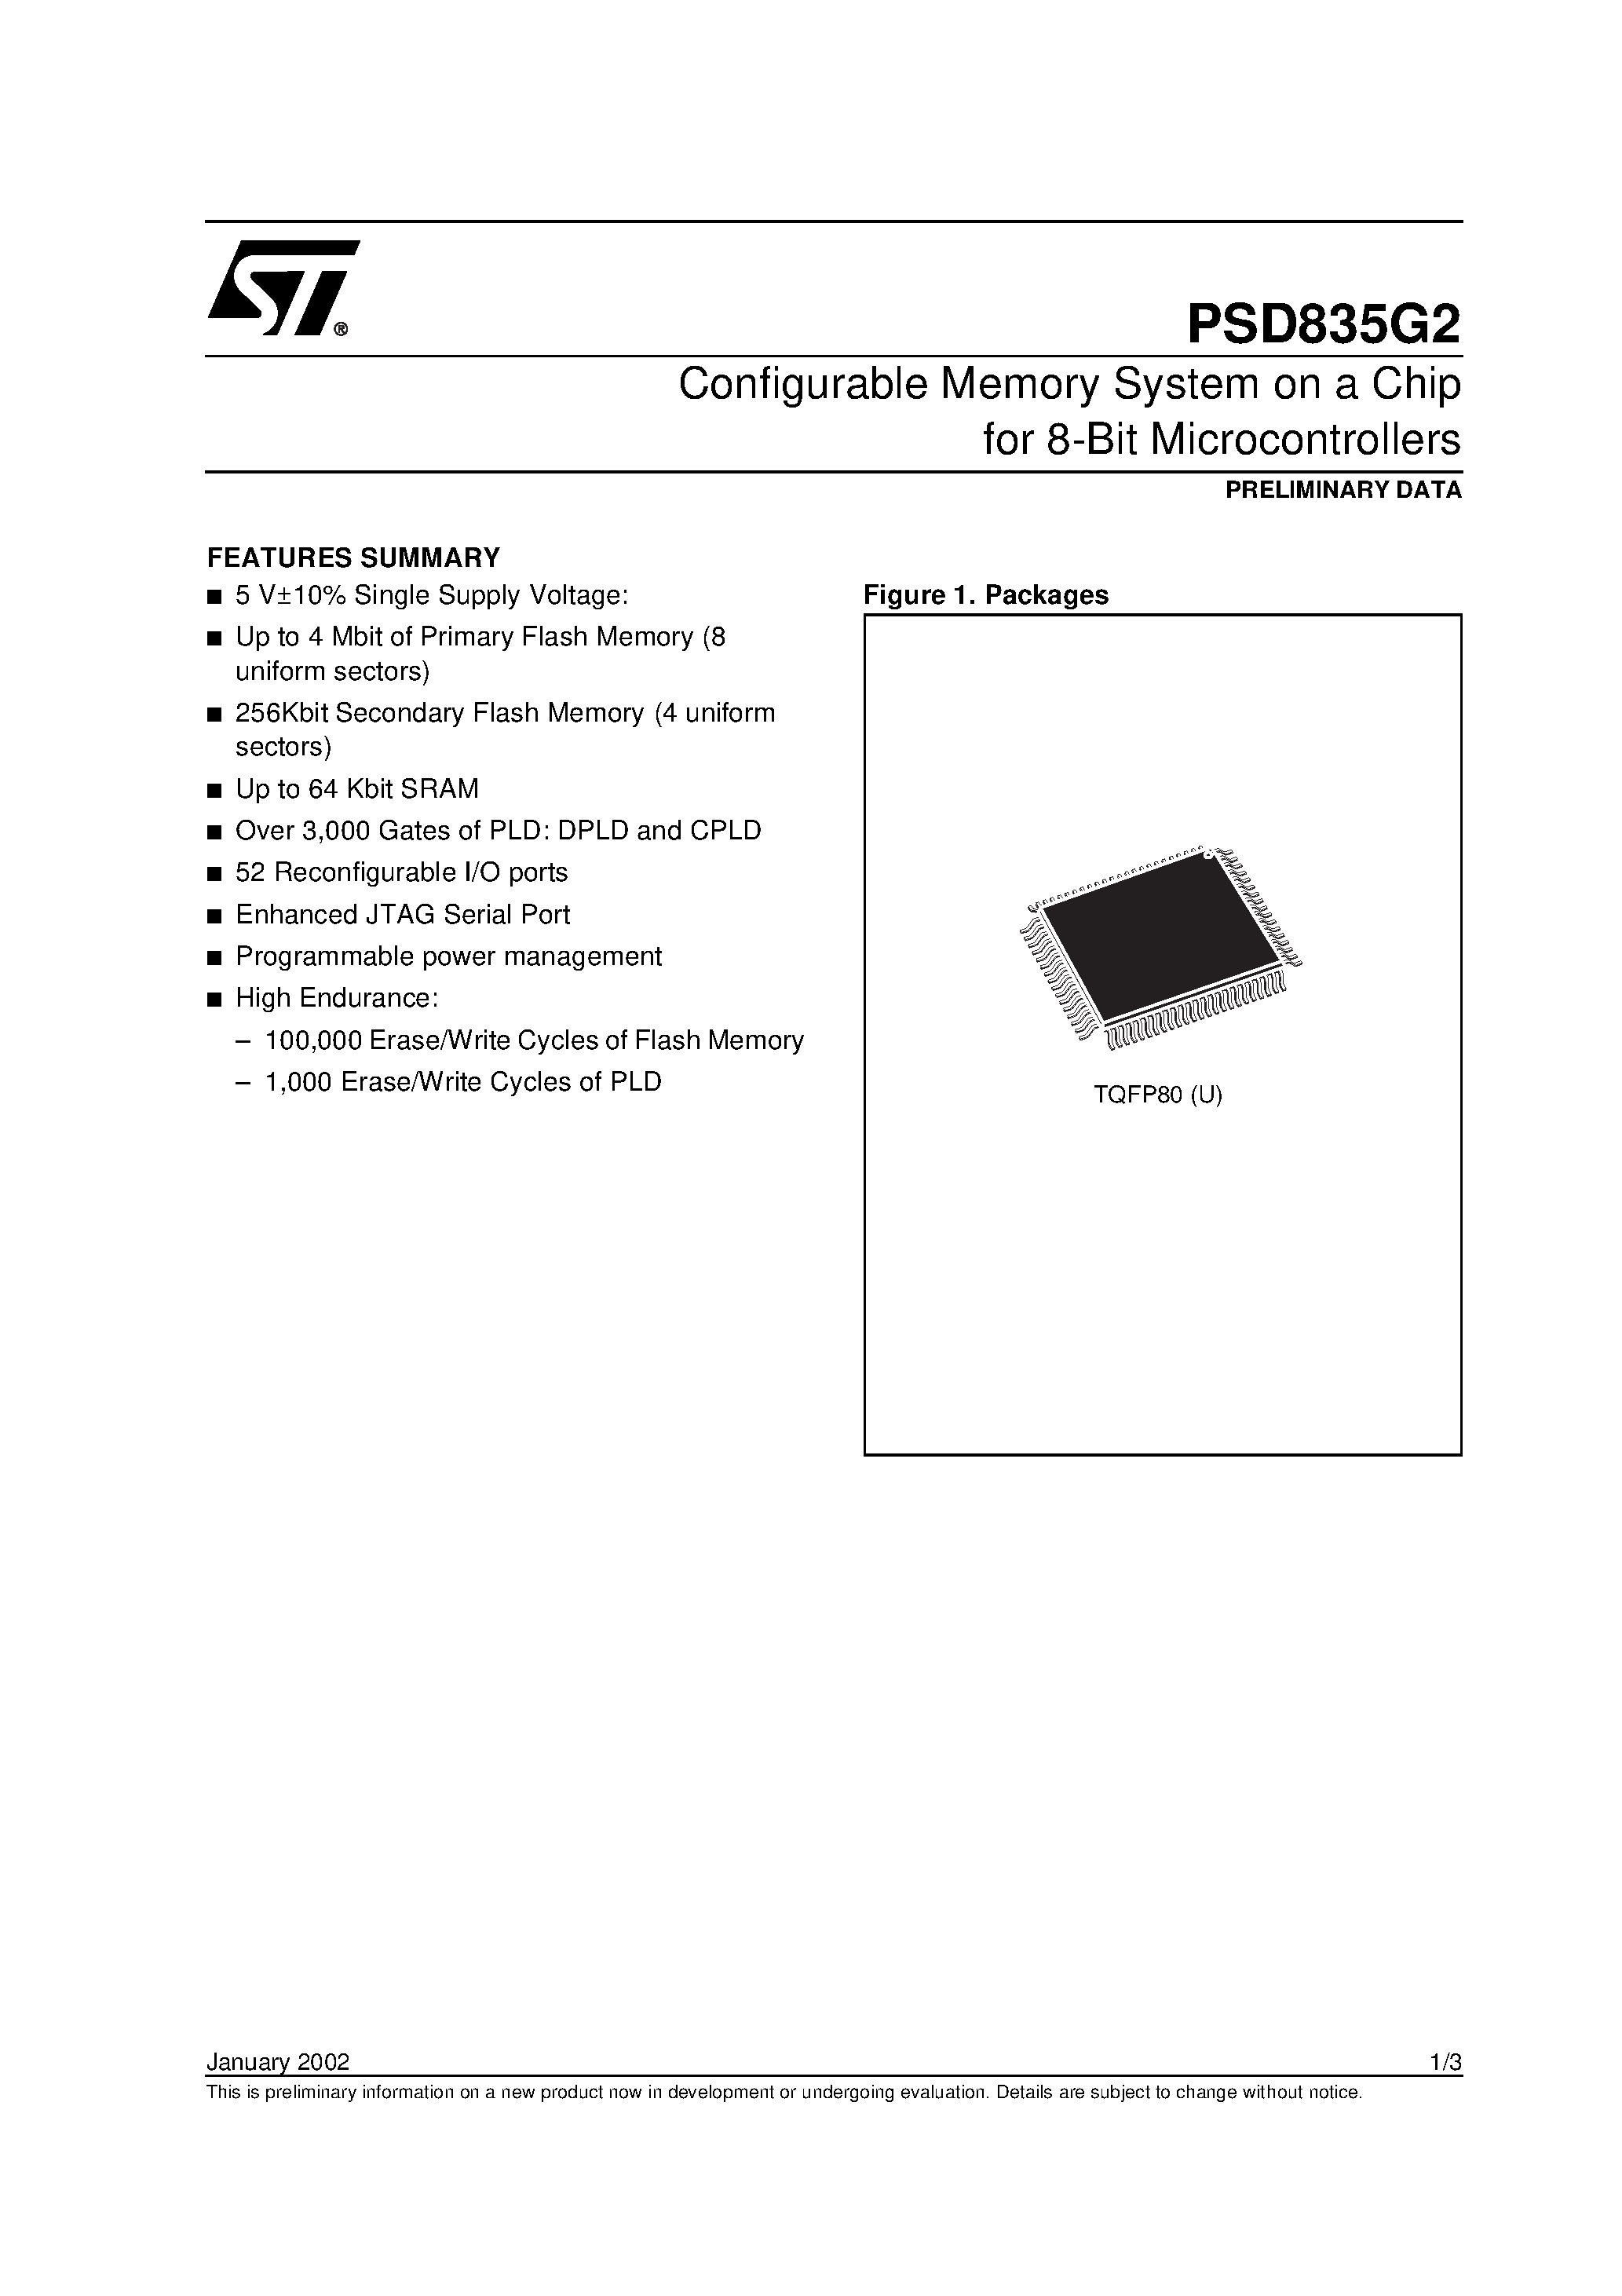 Datasheet PSD835F1-A-12M - Configurable Memory System on a Chip for 8-Bit Microcontrollers page 1